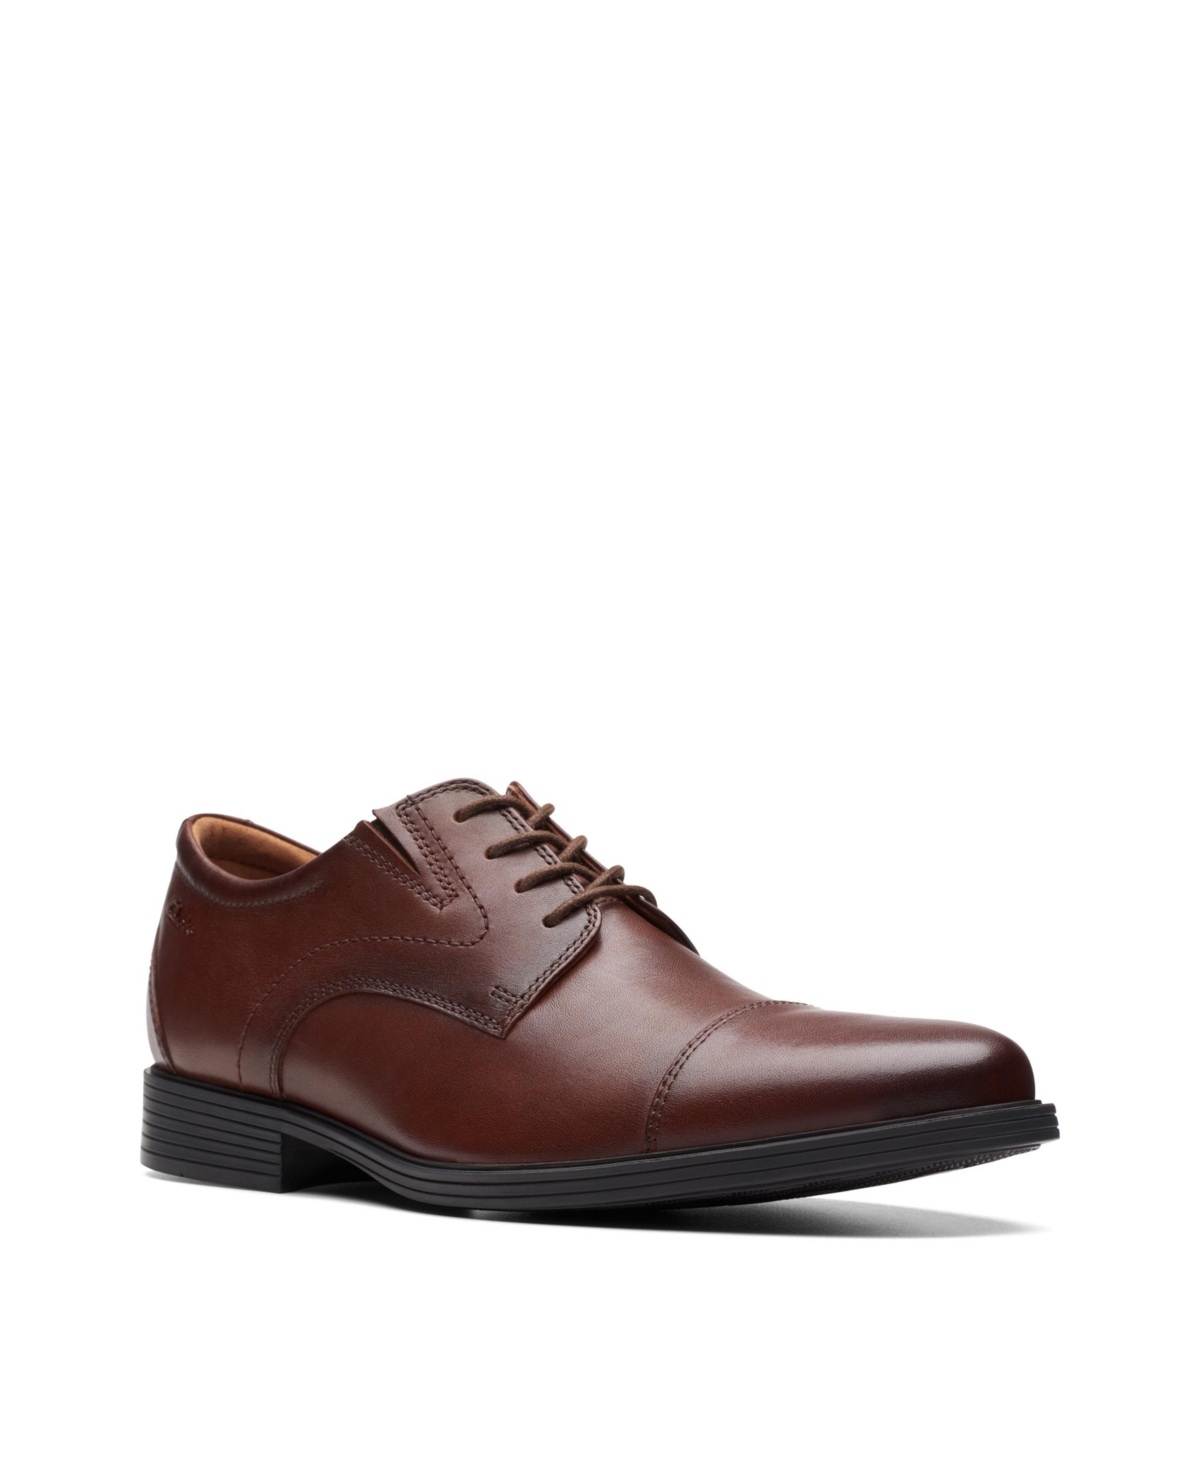 Clarks Mens Collection Whiddon Leather Cap Toe Dress Oxfords Mens Shoes